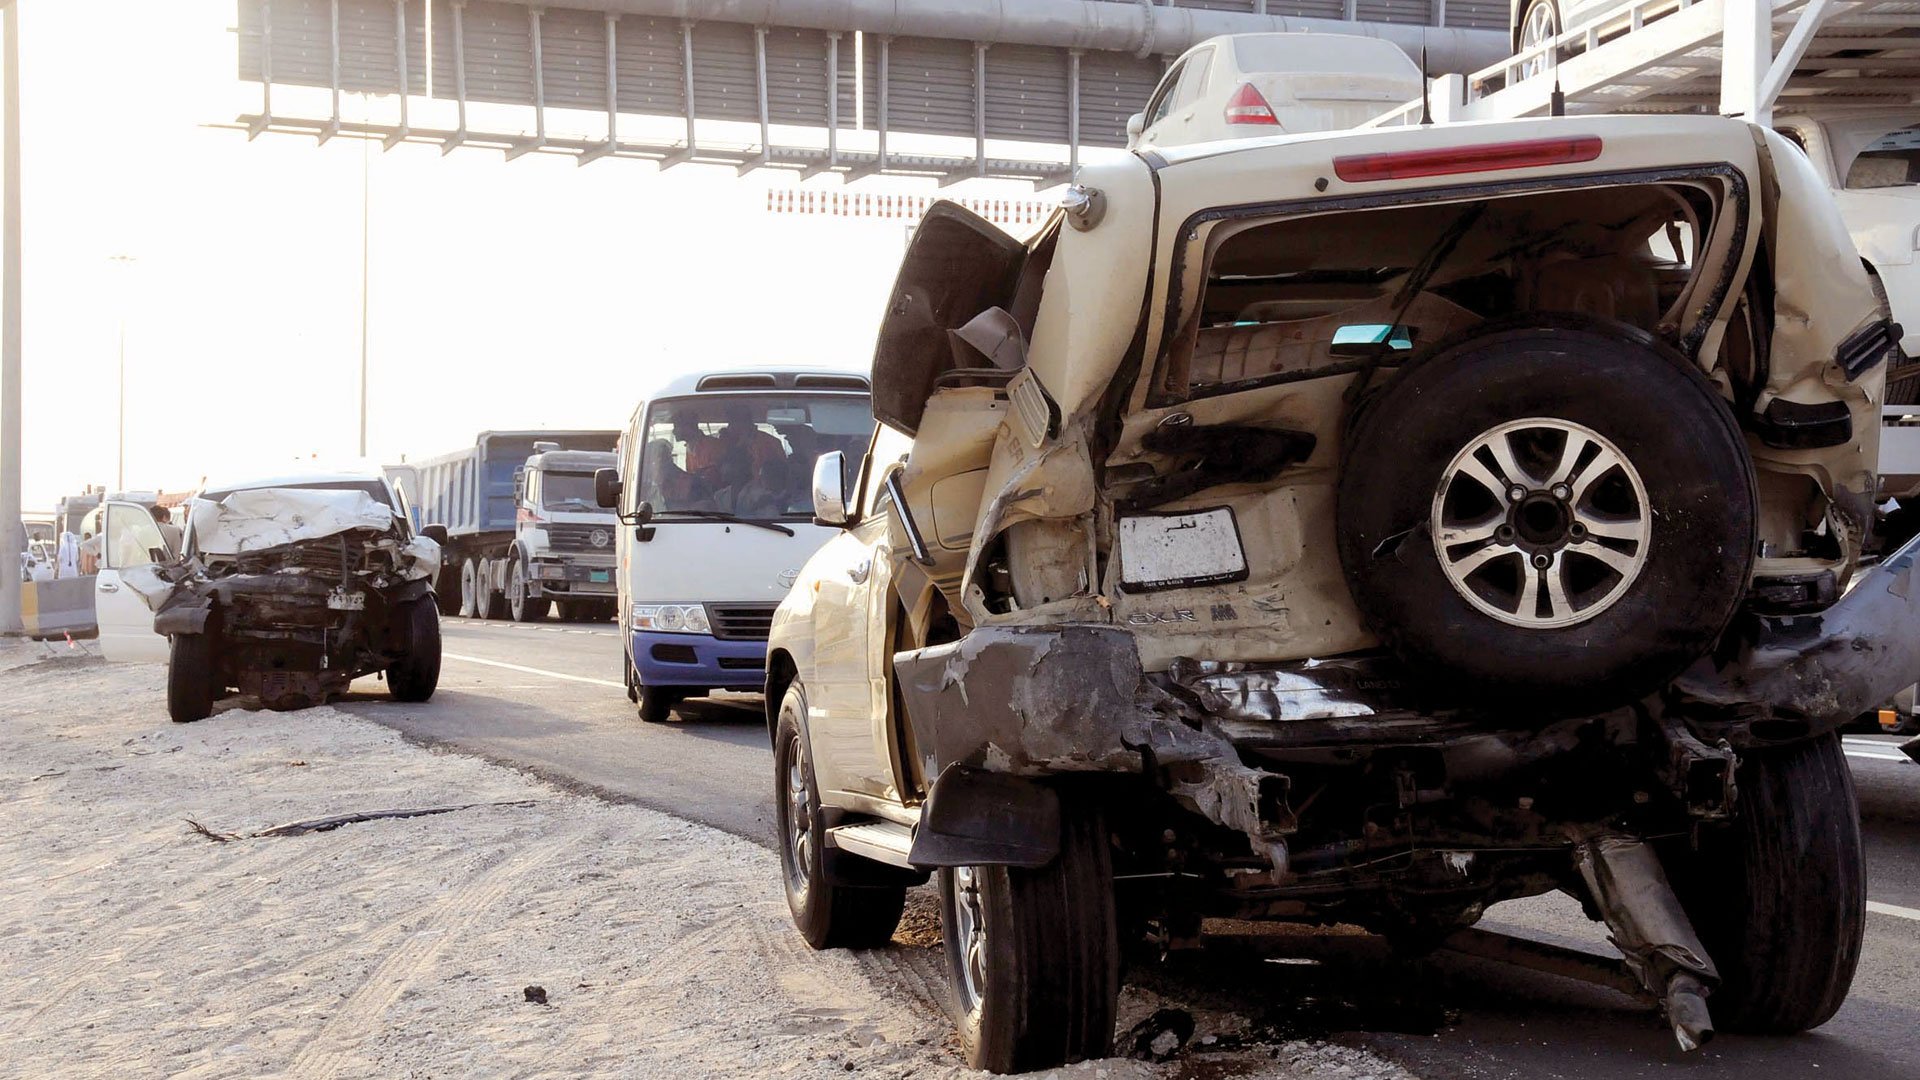 Car insurance policies are unfair to accident victims